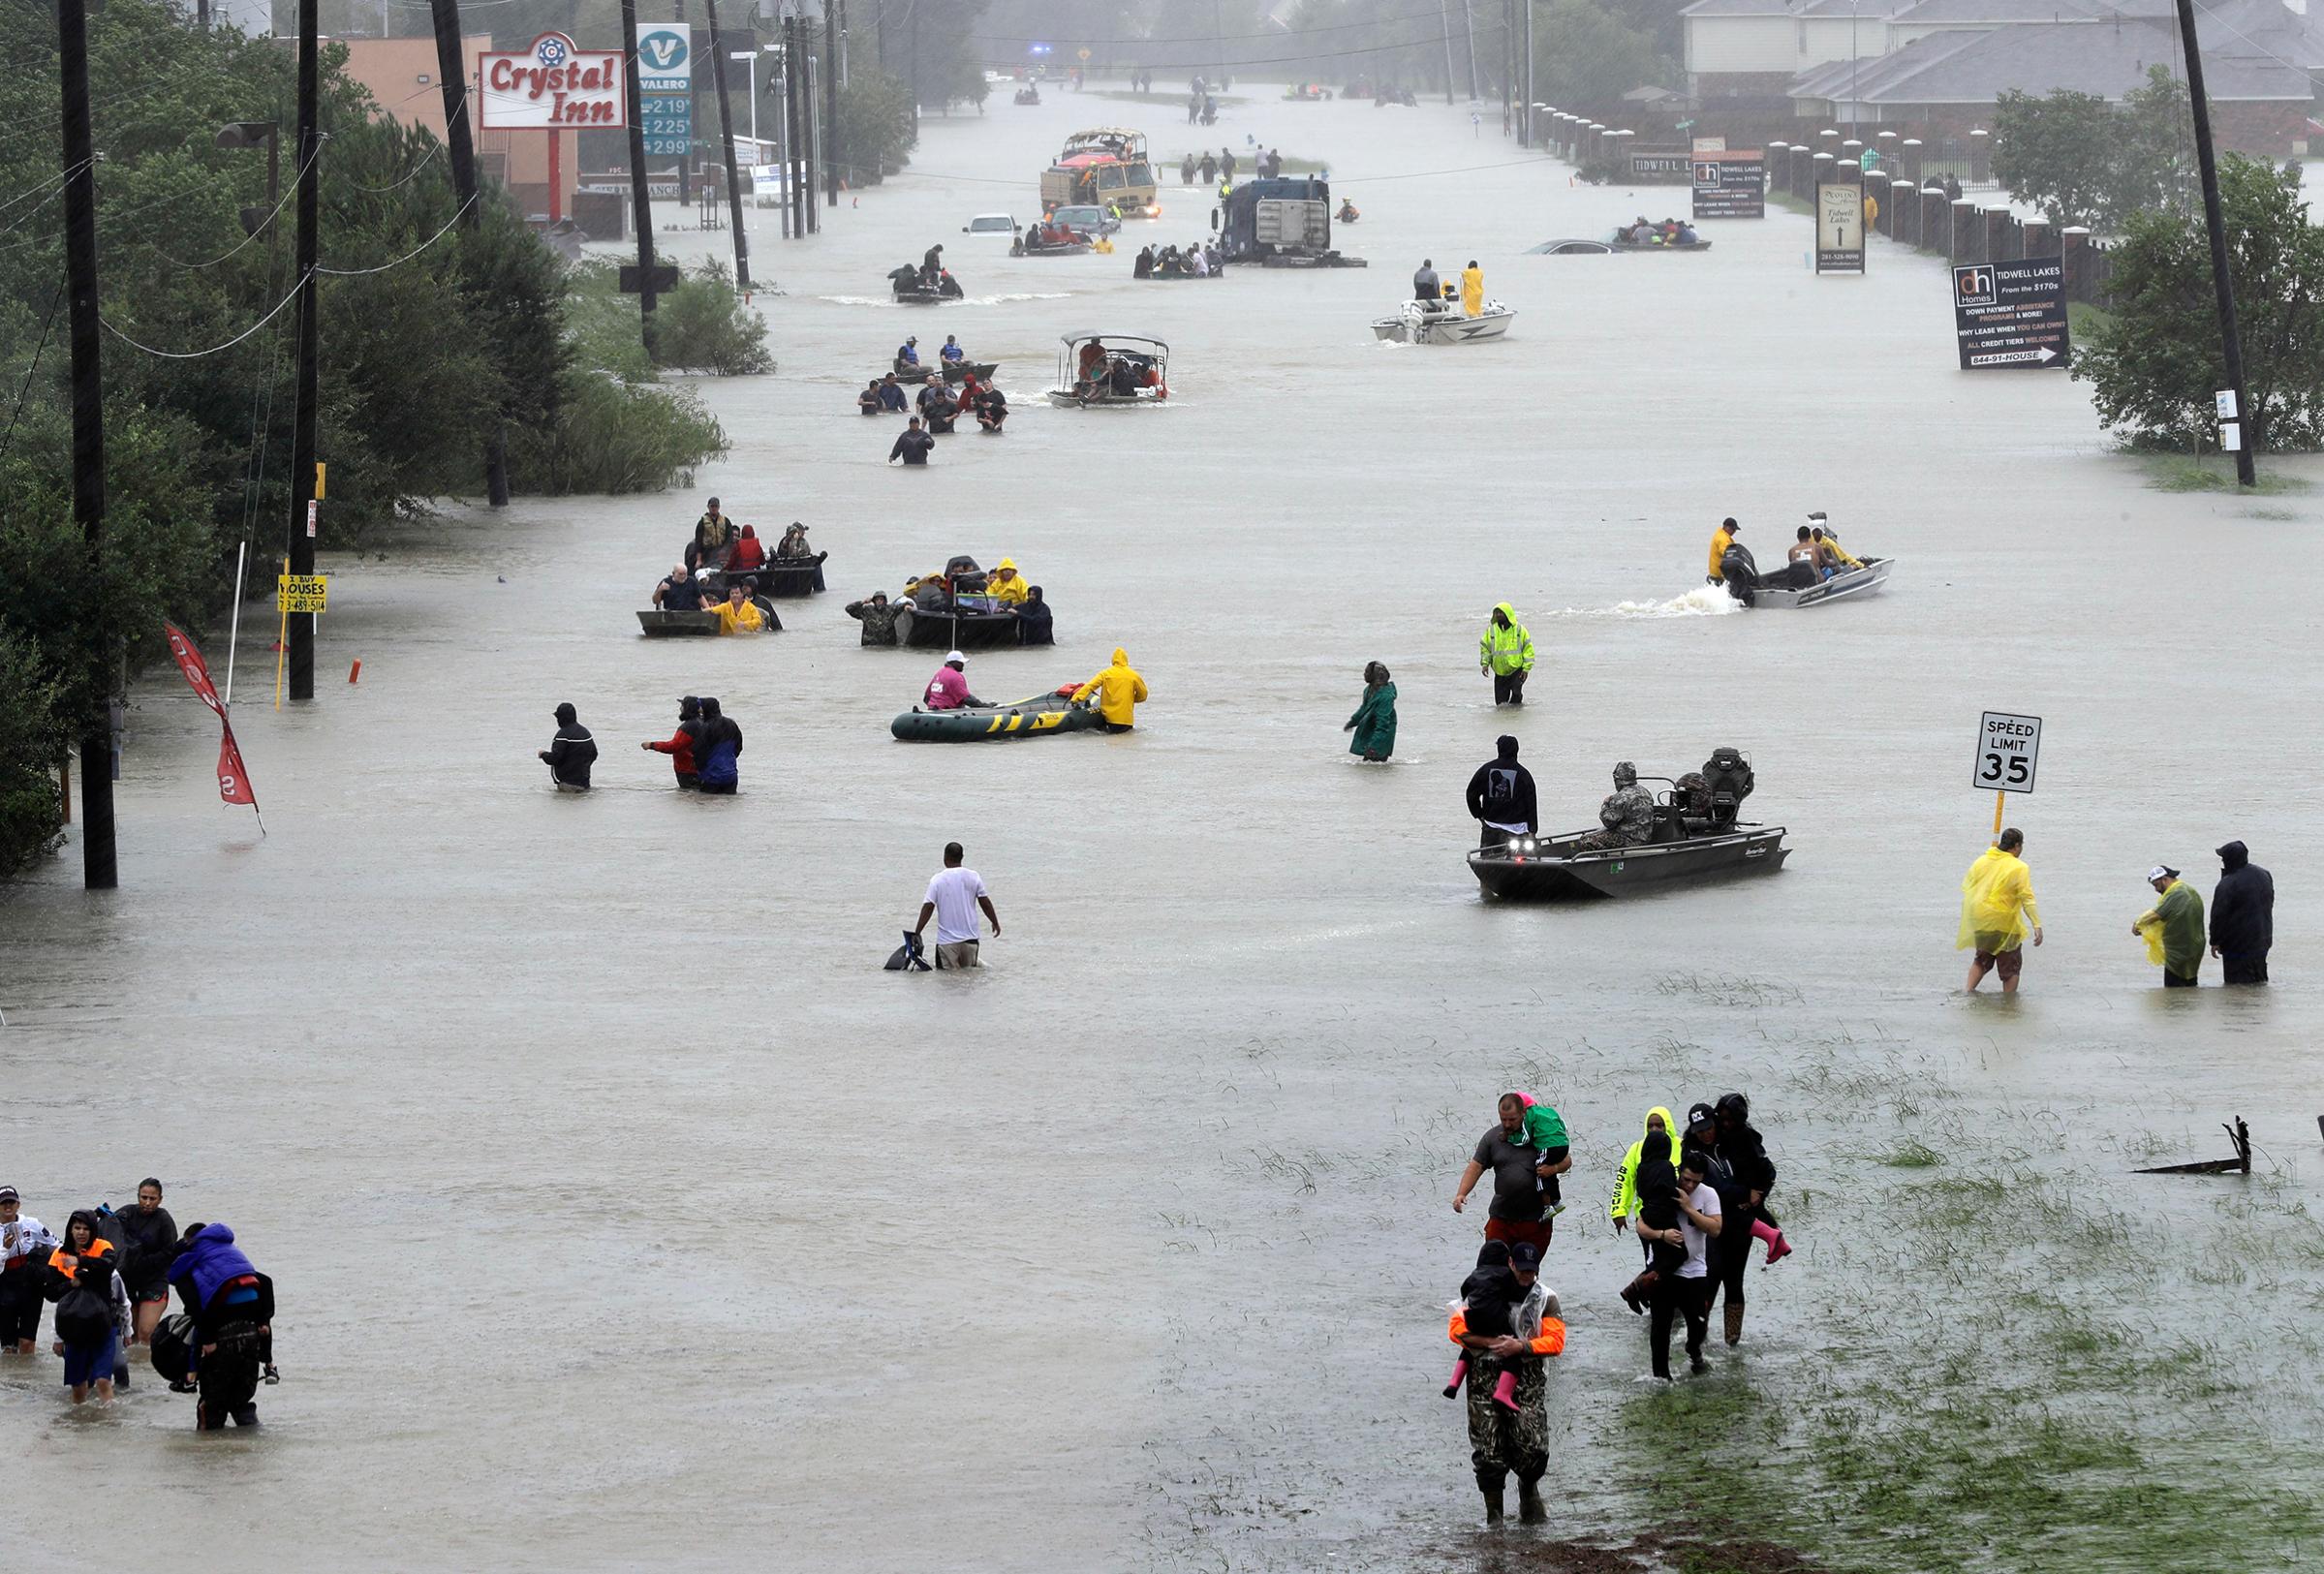 Rescue boats fill a flooded street as flood victims are evacuated floodwaters from Tropical Storm Harvey rise, Aug. 28, 2017, in Houston.